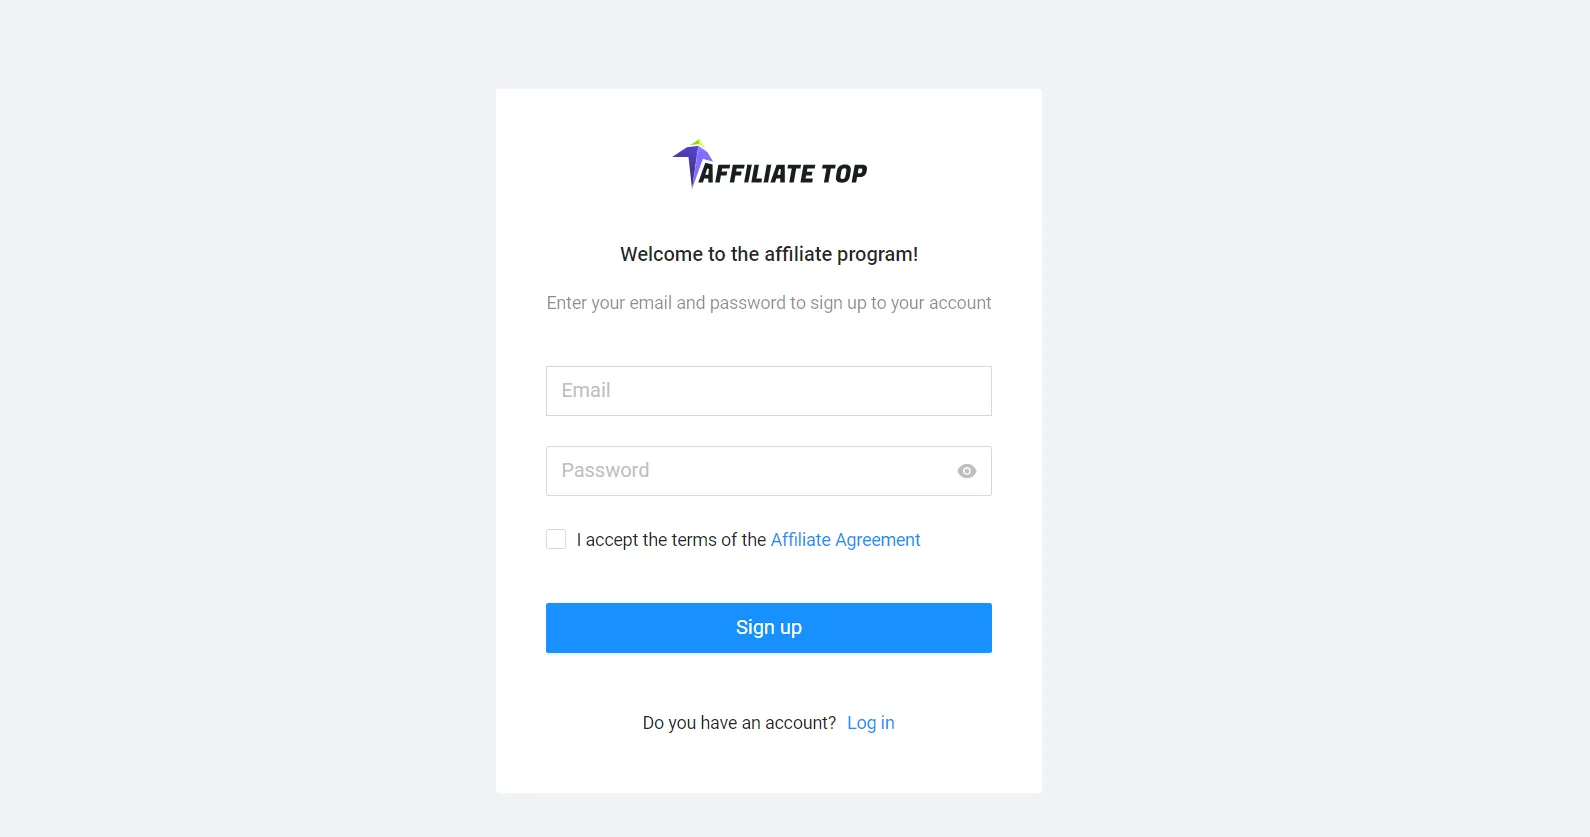 Sign Up for Affiliate Top